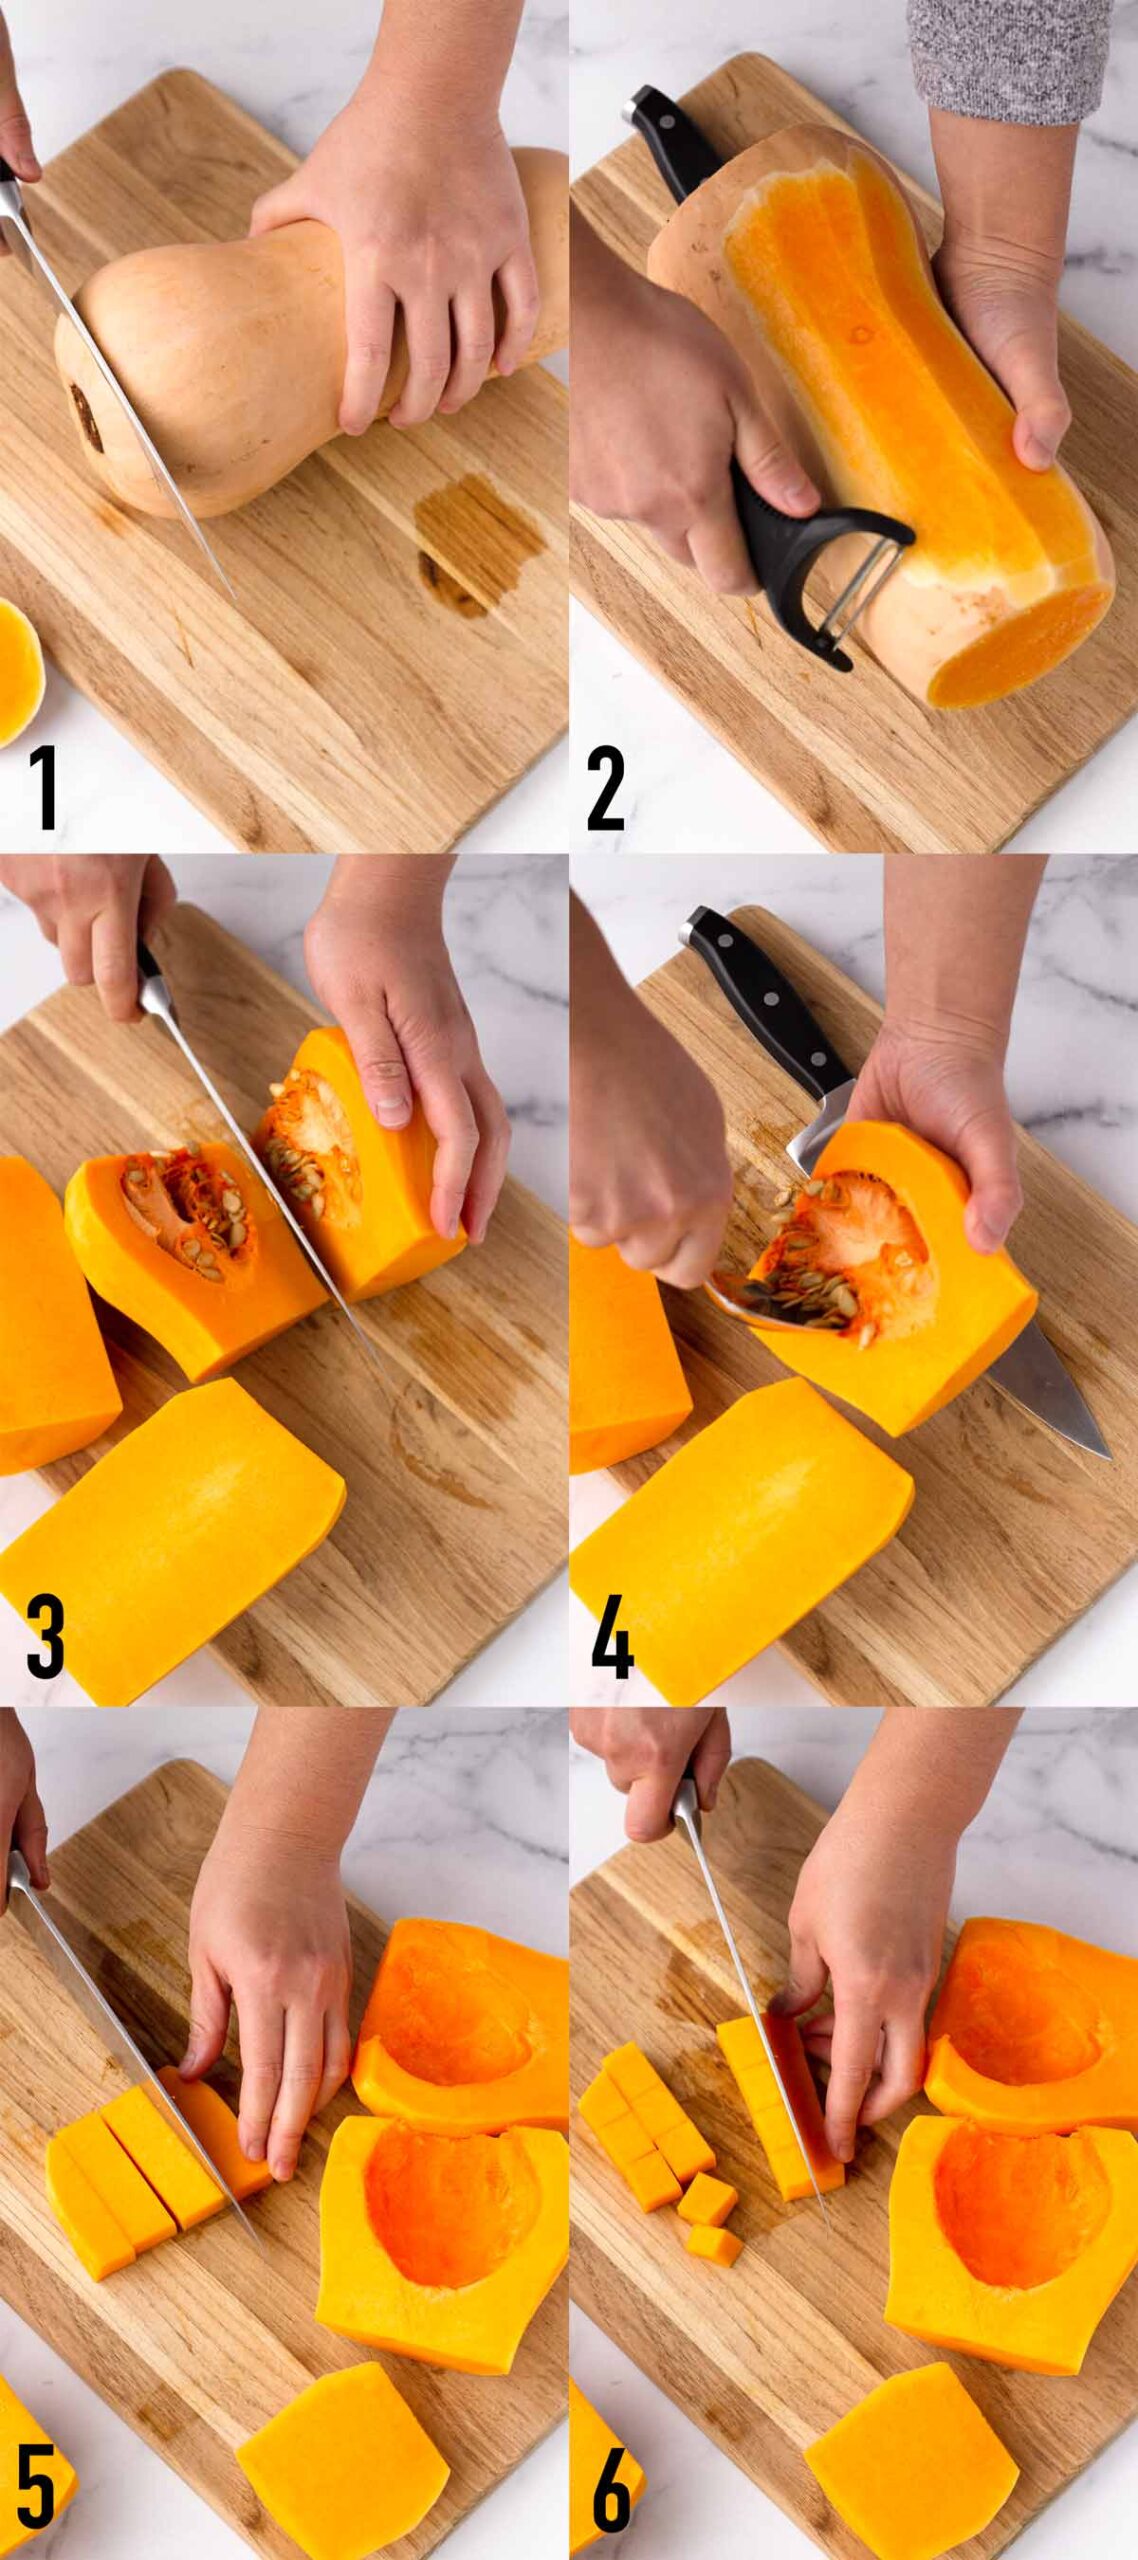 steps by step how to cut butternut squash